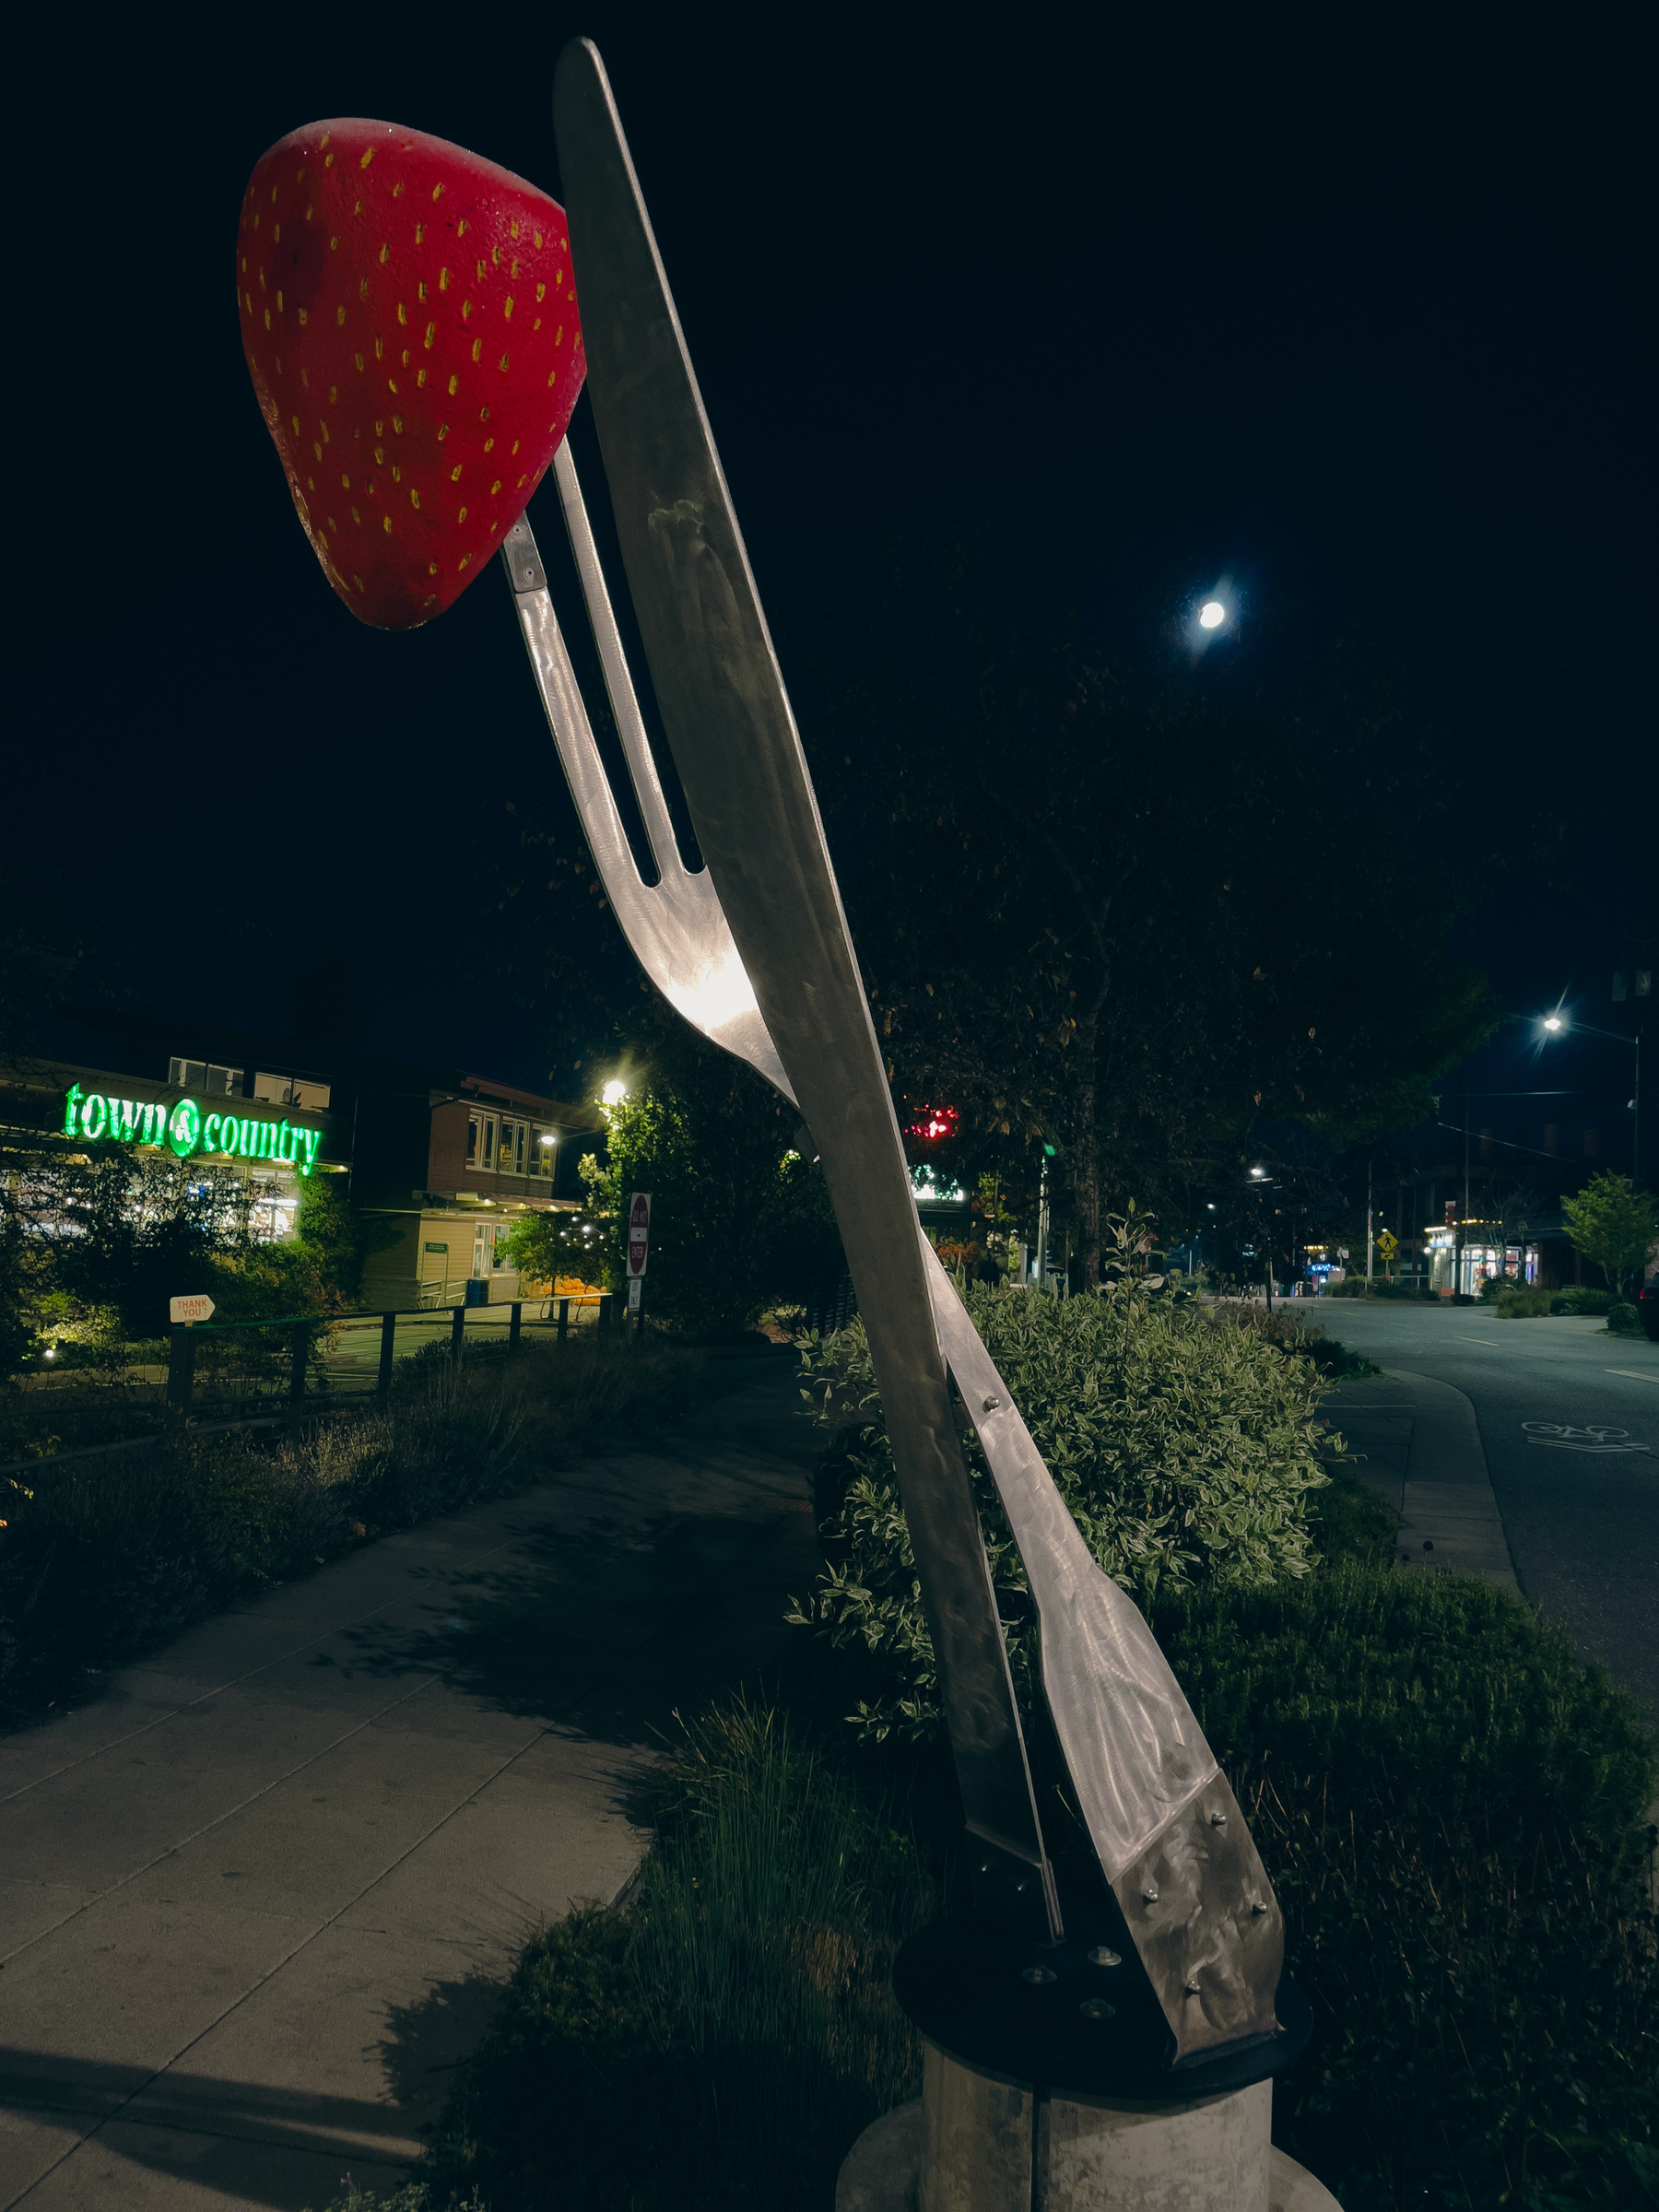 Giant knife and fork sculpture with giant strawberry impaled on top of fork.